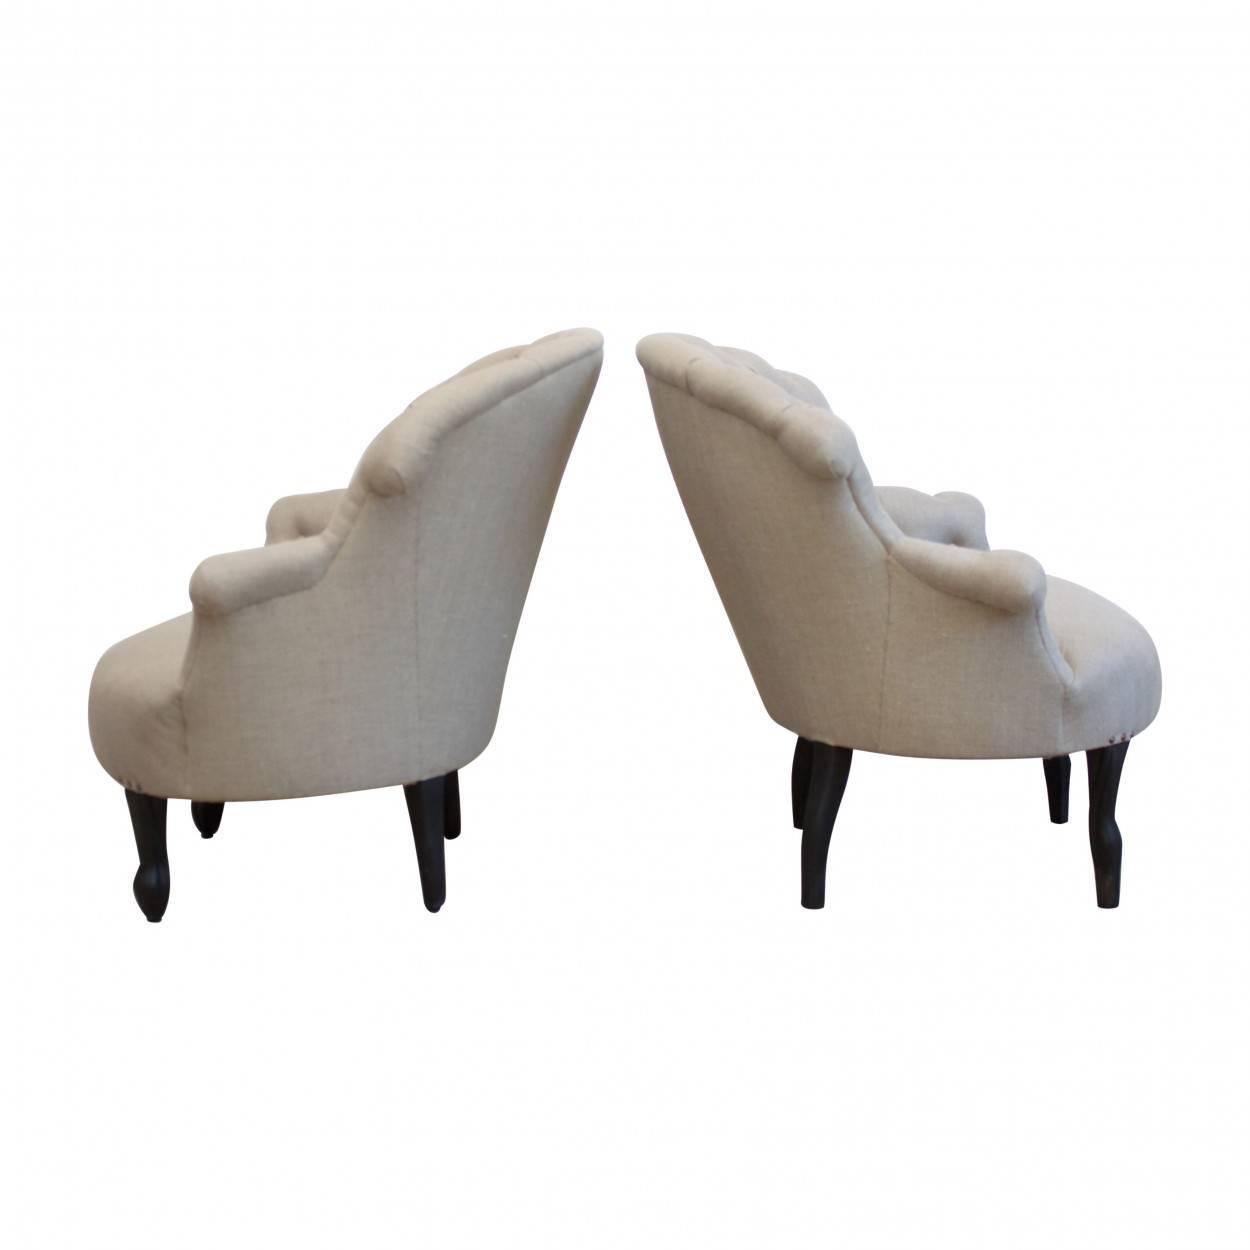 20th Century Near Matching Pair of French Armchairs